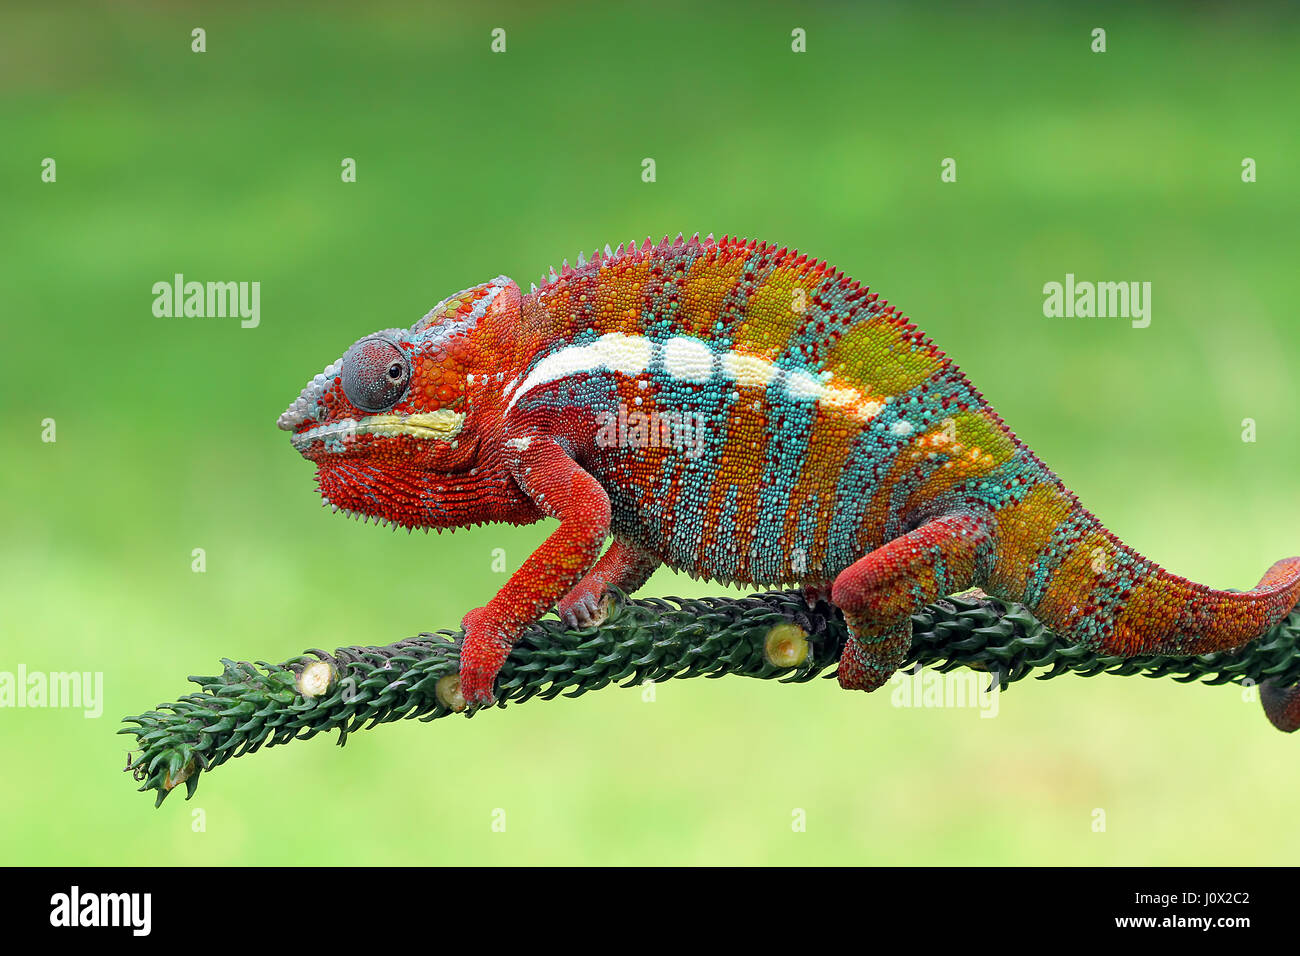 Panther chameleon on branch, Indonesia Stock Photo